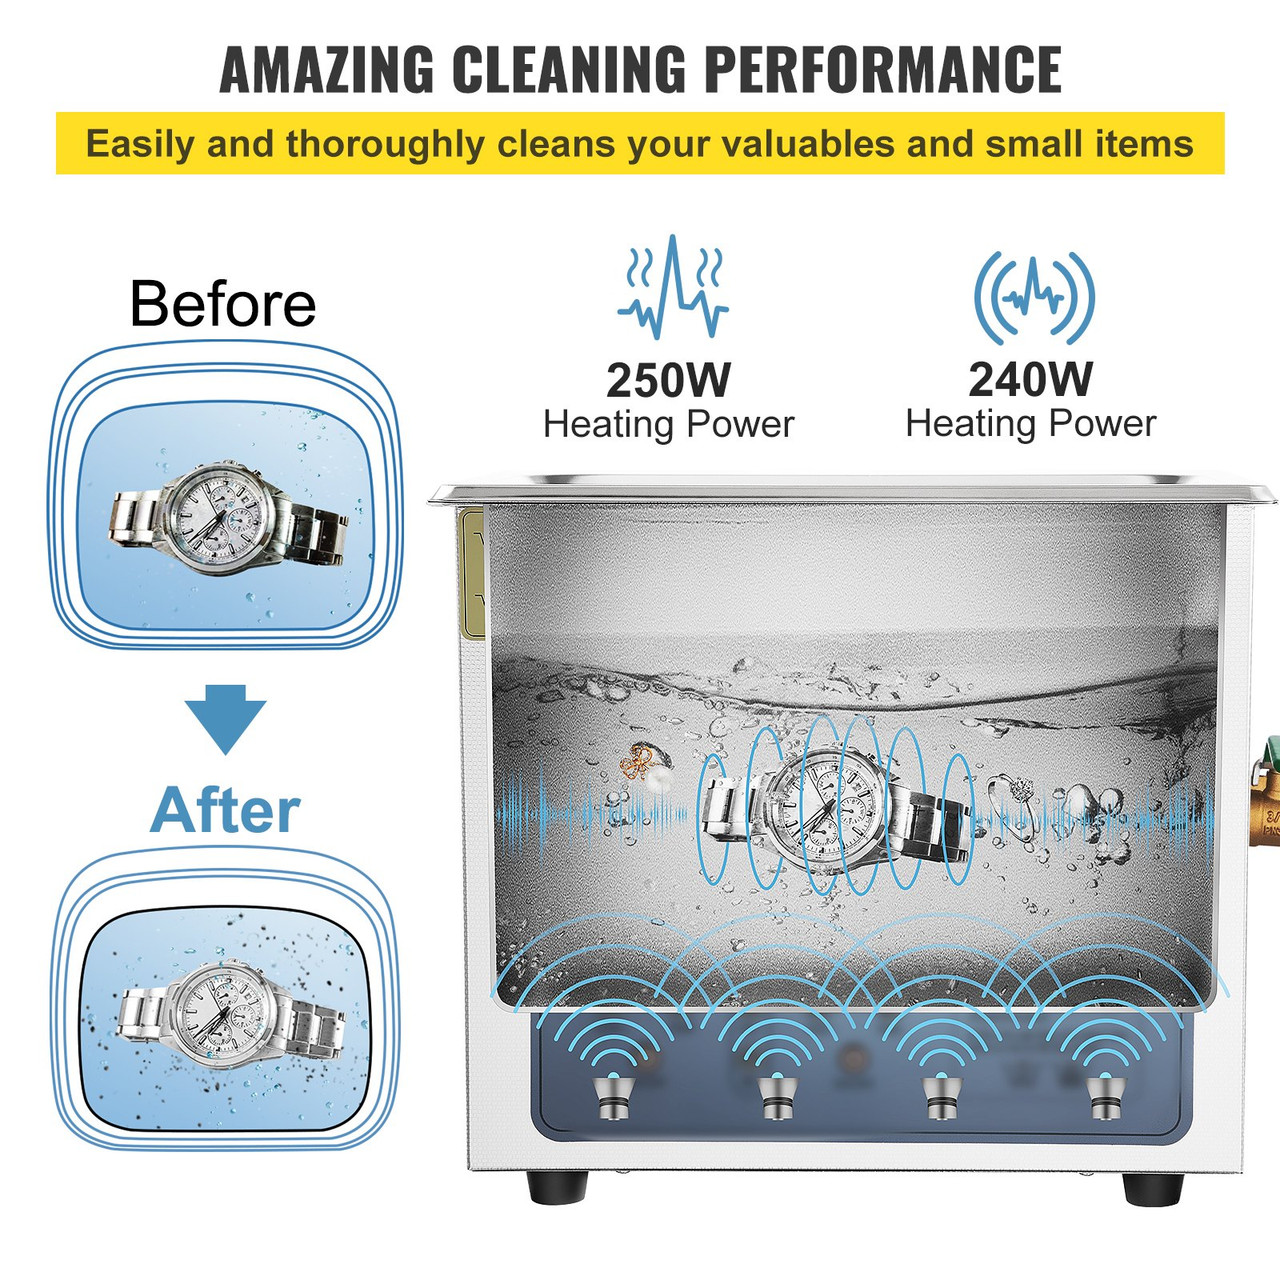 10L Ultrasonic Cleaner with Digital Timer and Heater for Cleaning